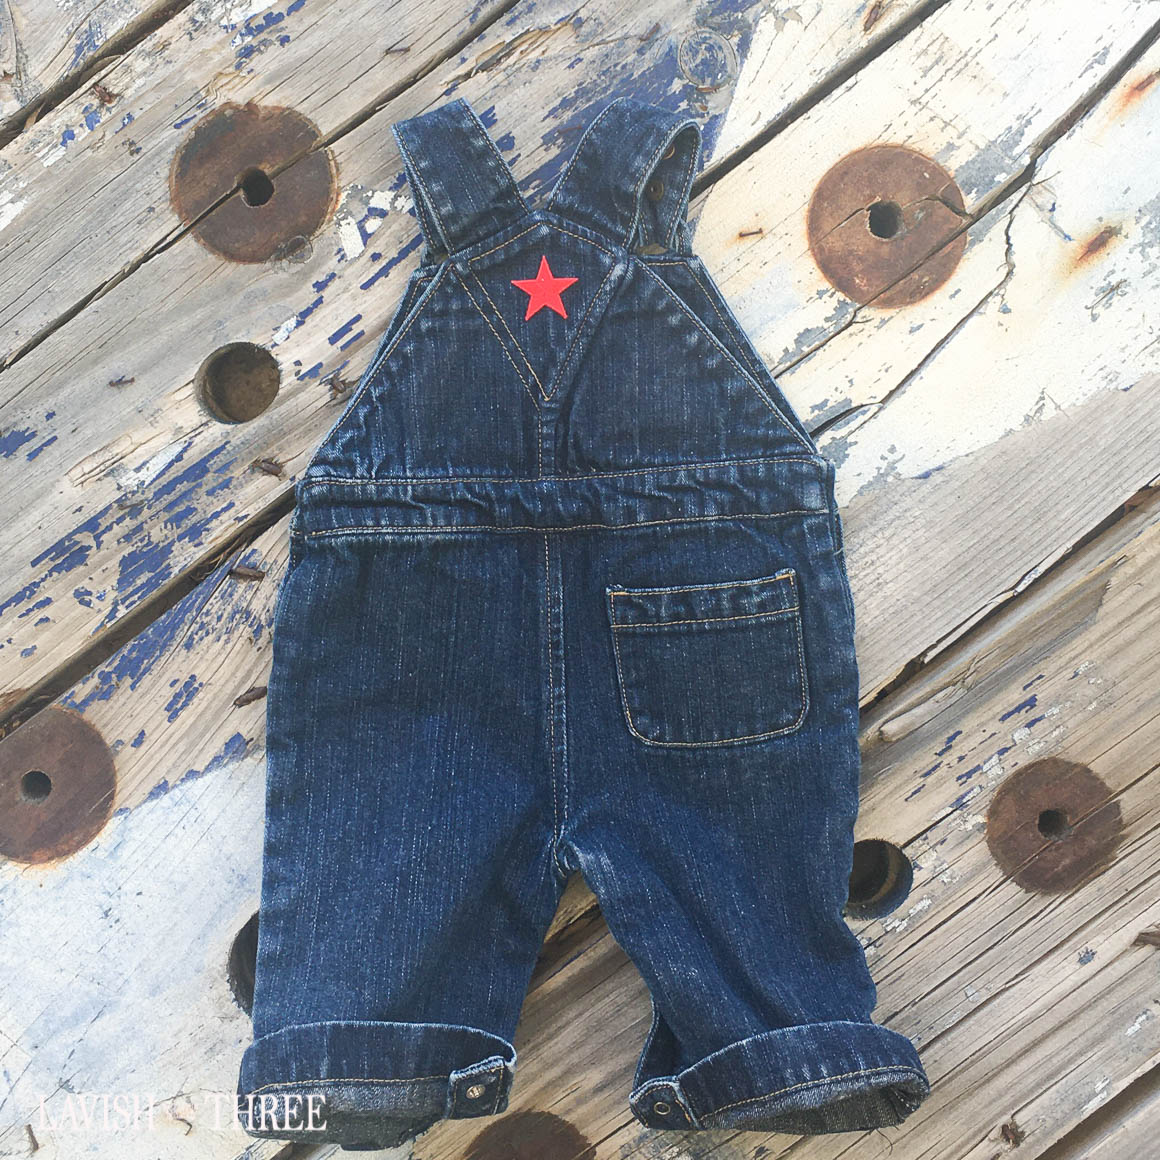 The "little All American kid" denim overalls with eagle & flag